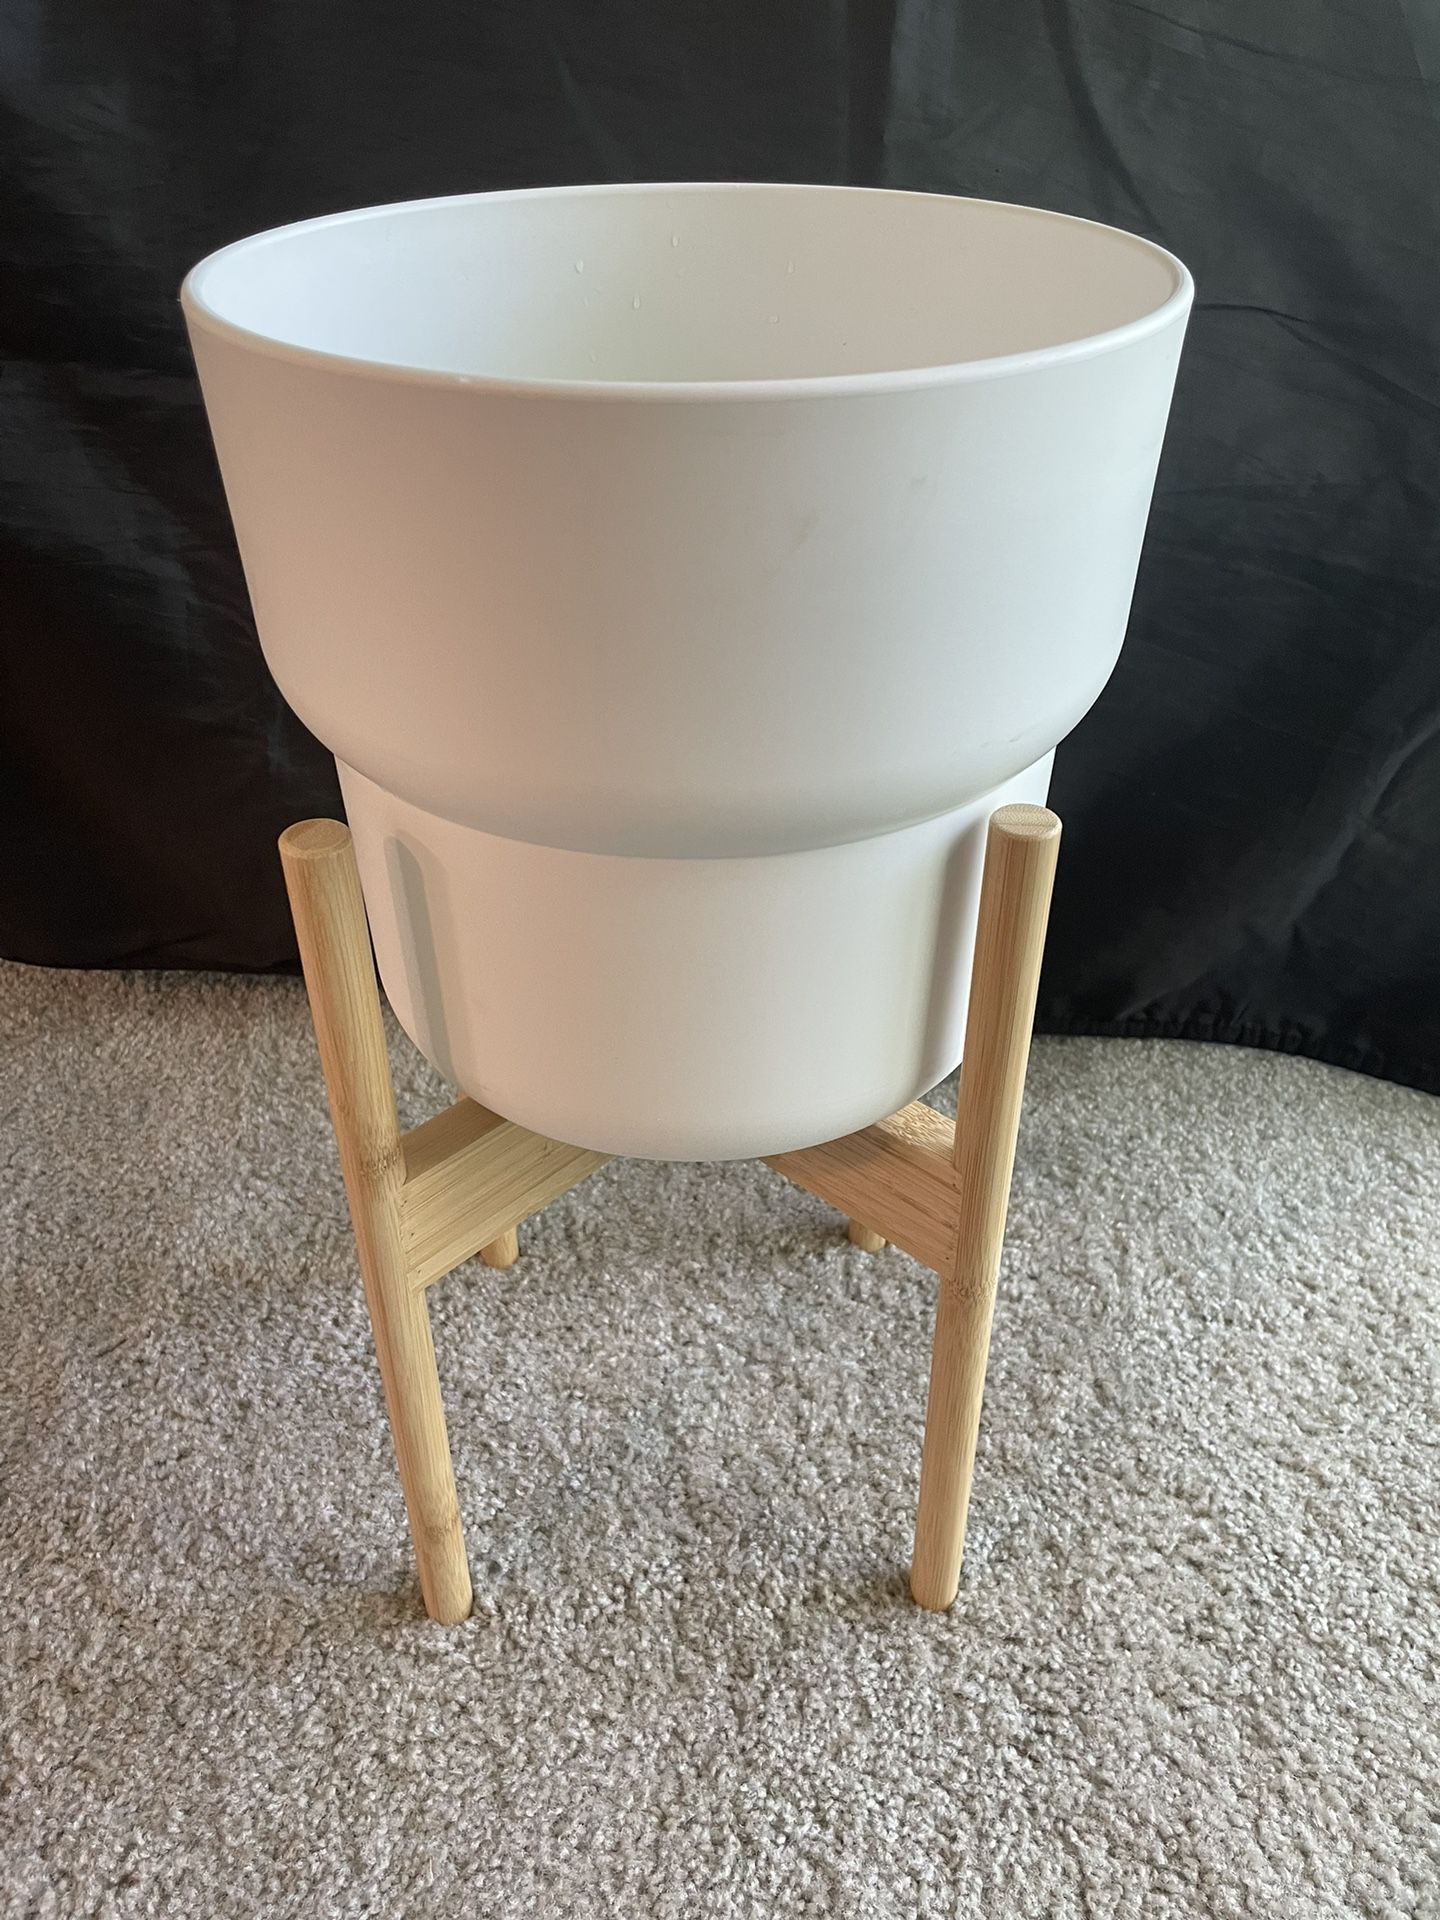 Plant Pot With Wooden Stand